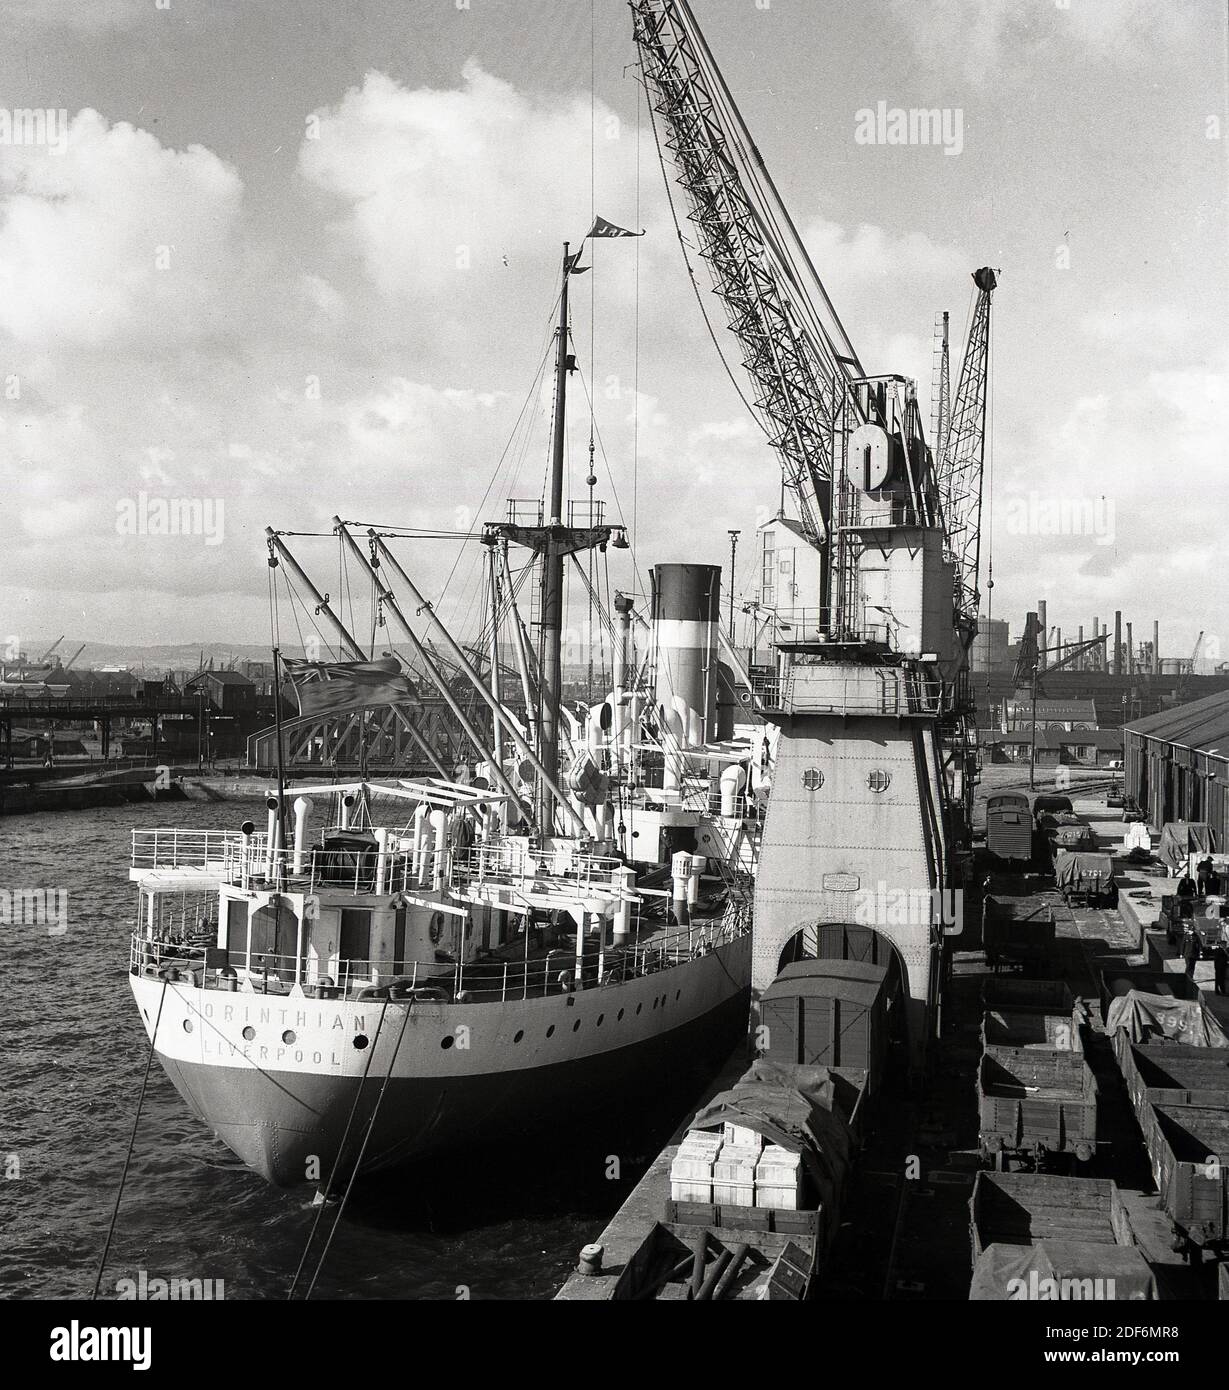 1950s, historical, the cargo ship 'Corinthian', Liverpool, moored at the quayside at the docks in Belfast, Northern Ireland. The steel screw steamer was built on Teeside in 1938 by William Gray & Co of West Hartlepool for Ellerman Lines of Liverpool. Between 1940 and 1945 during WW2, she functioned as a training ship as she was requistioned by the British Admiralty. in 1963 she was broken up at Dalmuir, Clyebank, Scotland. Stock Photo